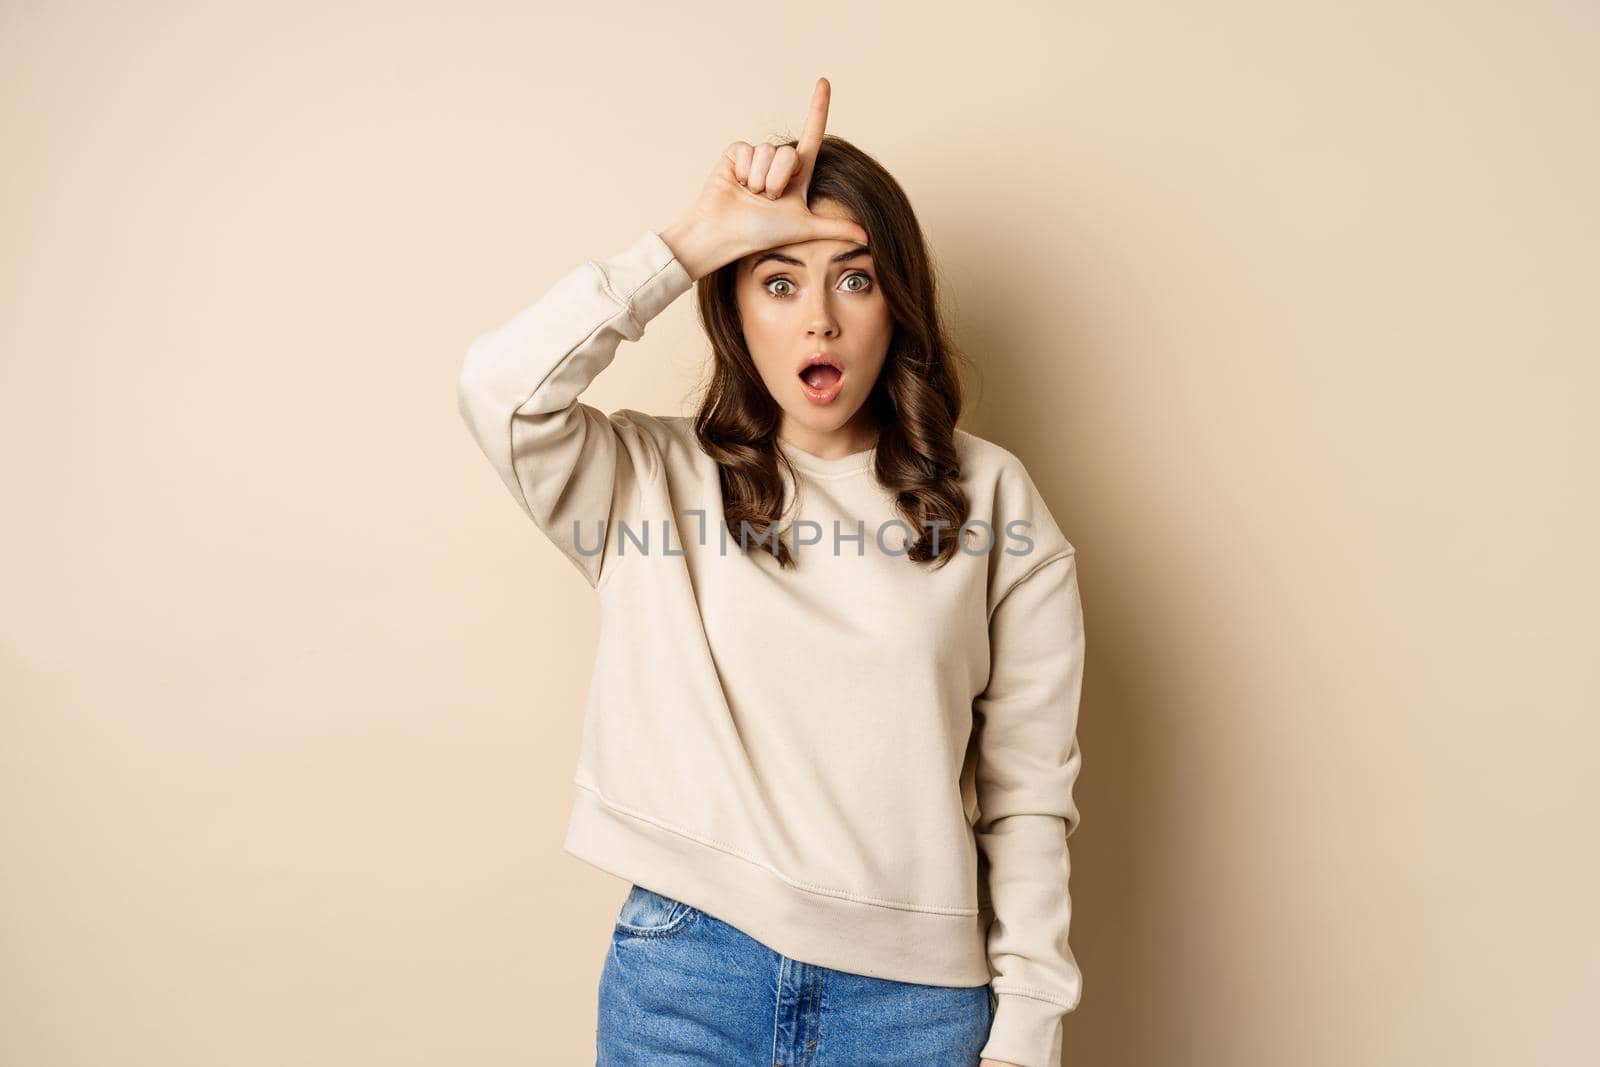 Woman showing loser sign on forehead, L word, standing over beige background. Copy space